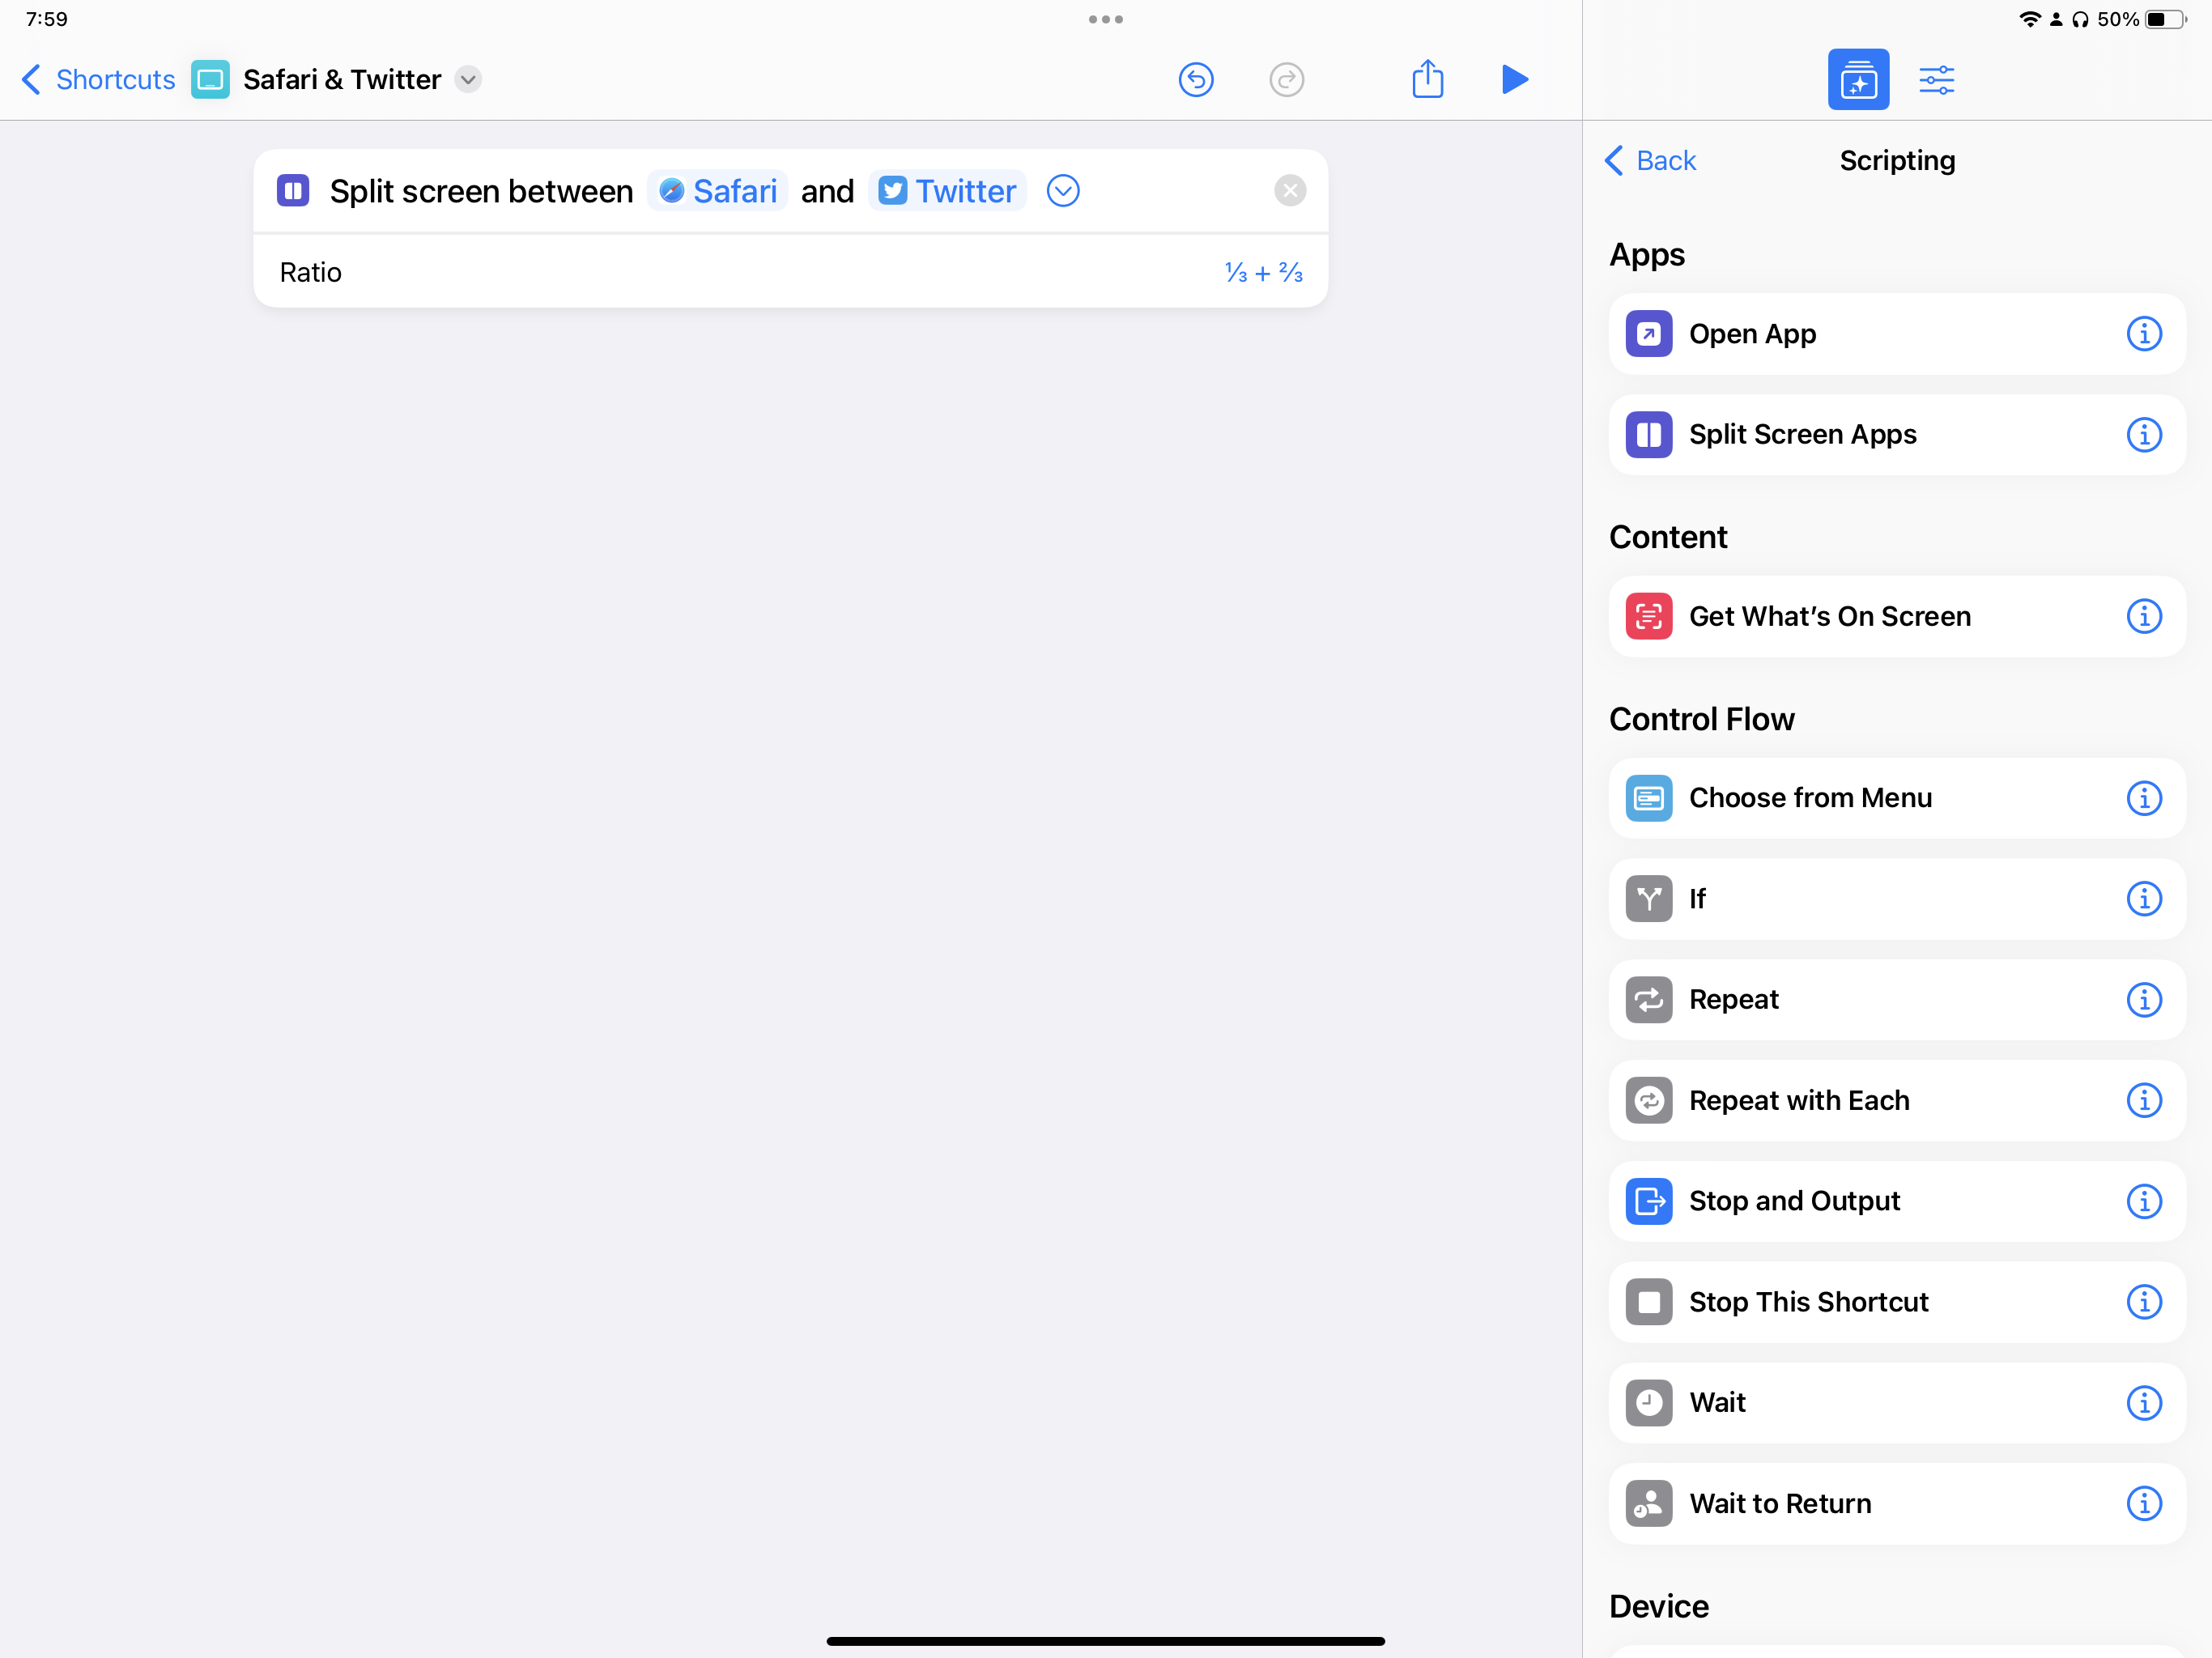 Screenshot of the Split Screen Apps action in Shortcuts.